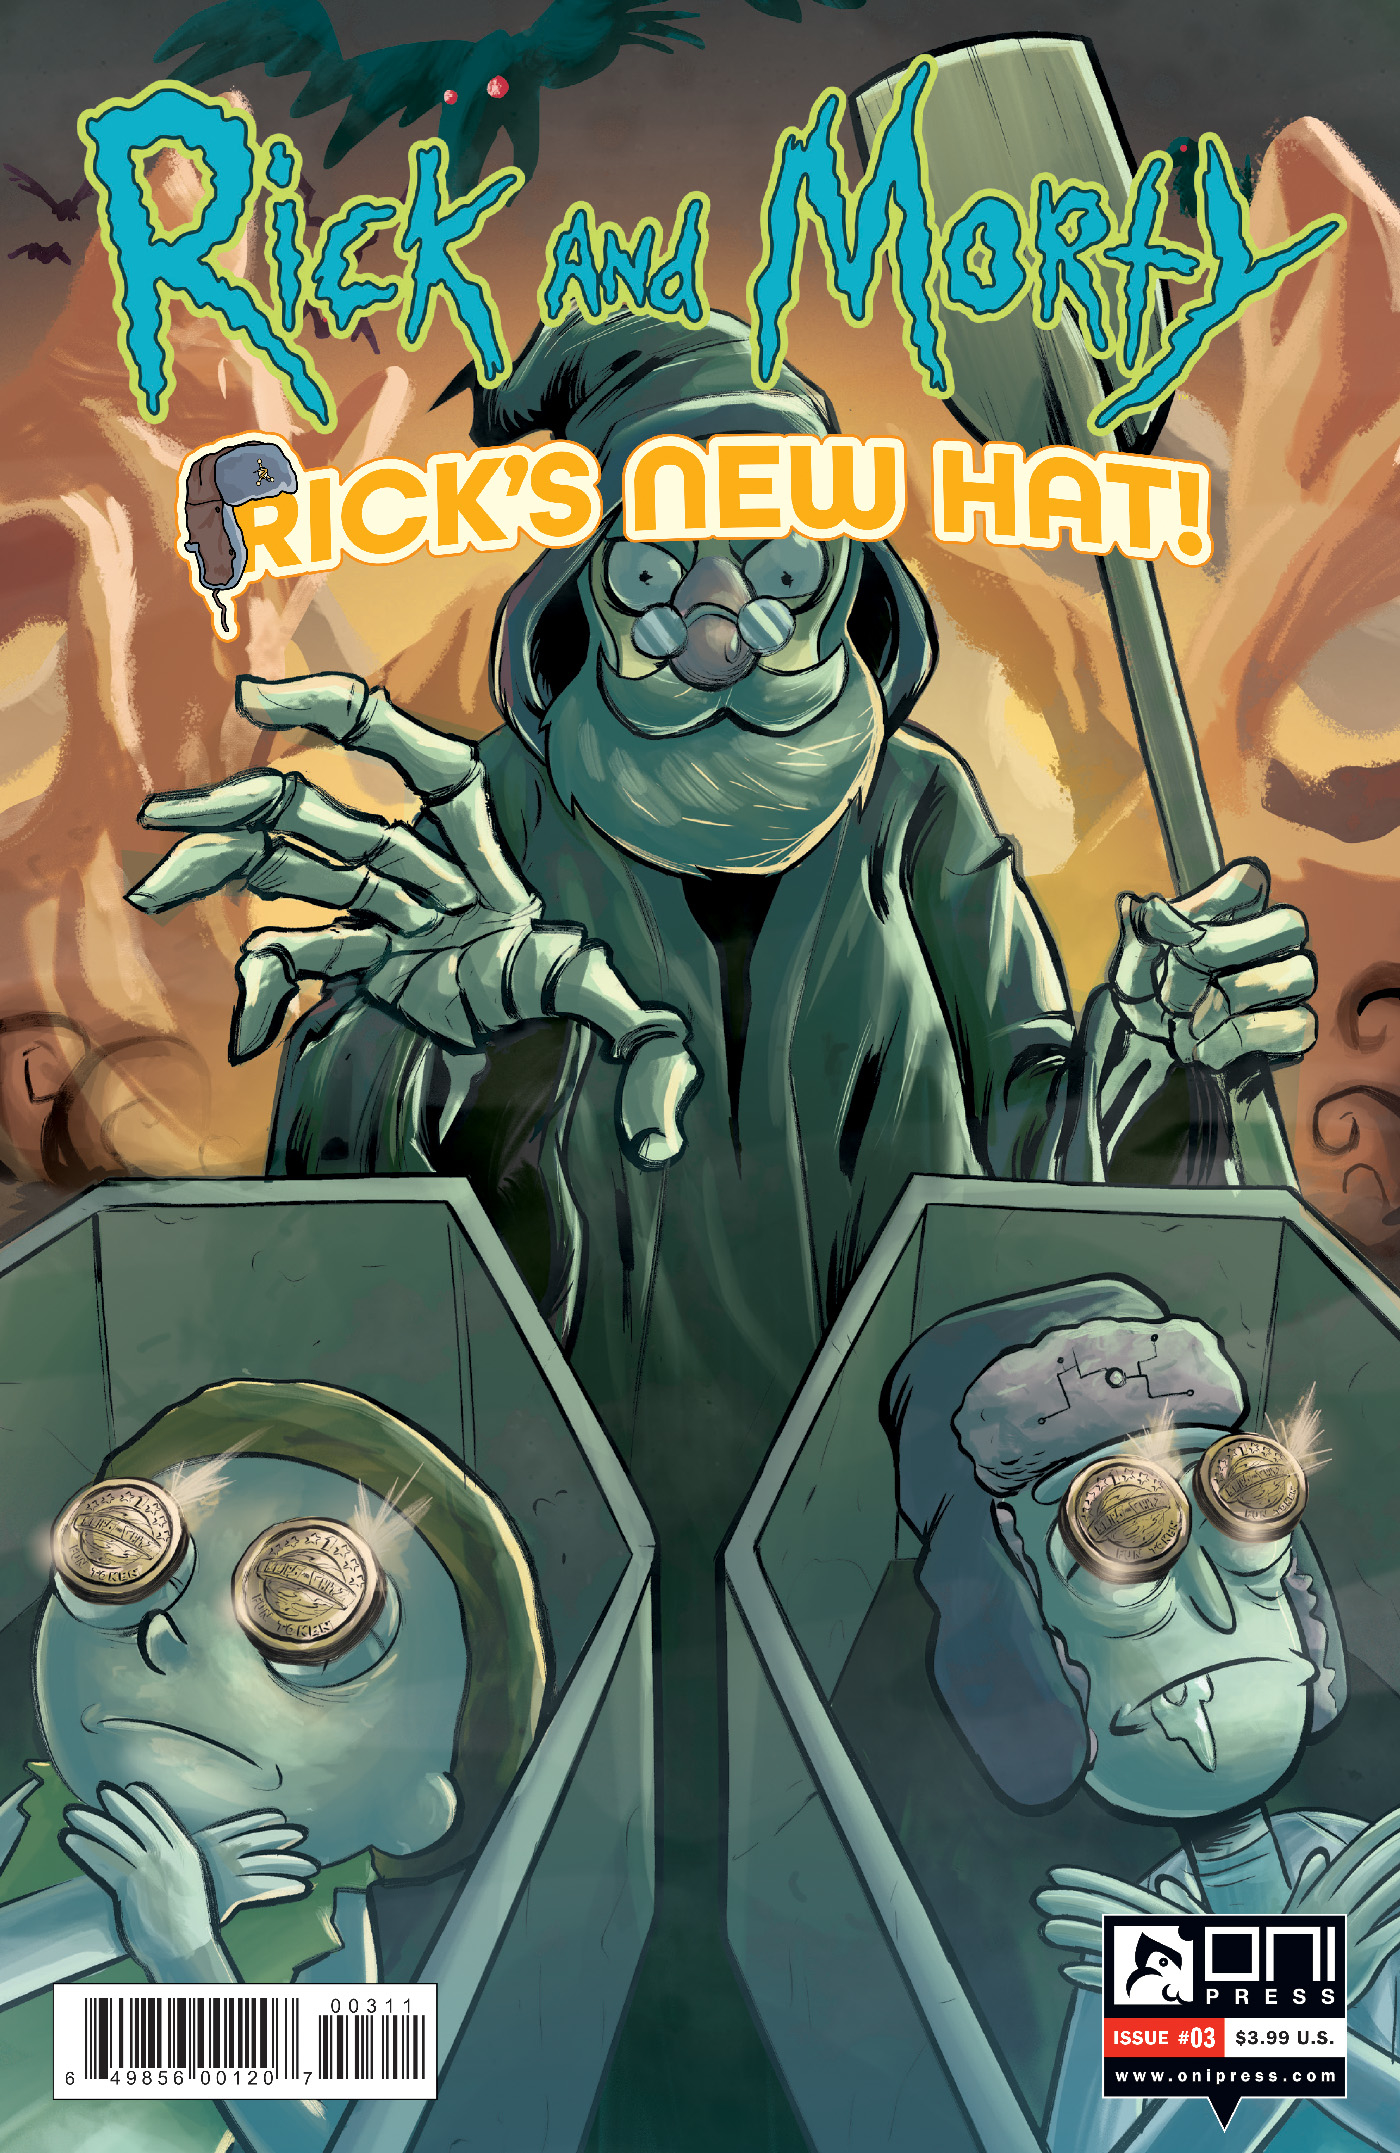 Rick and Morty Ricks New Hat #3 Cover A Stresing